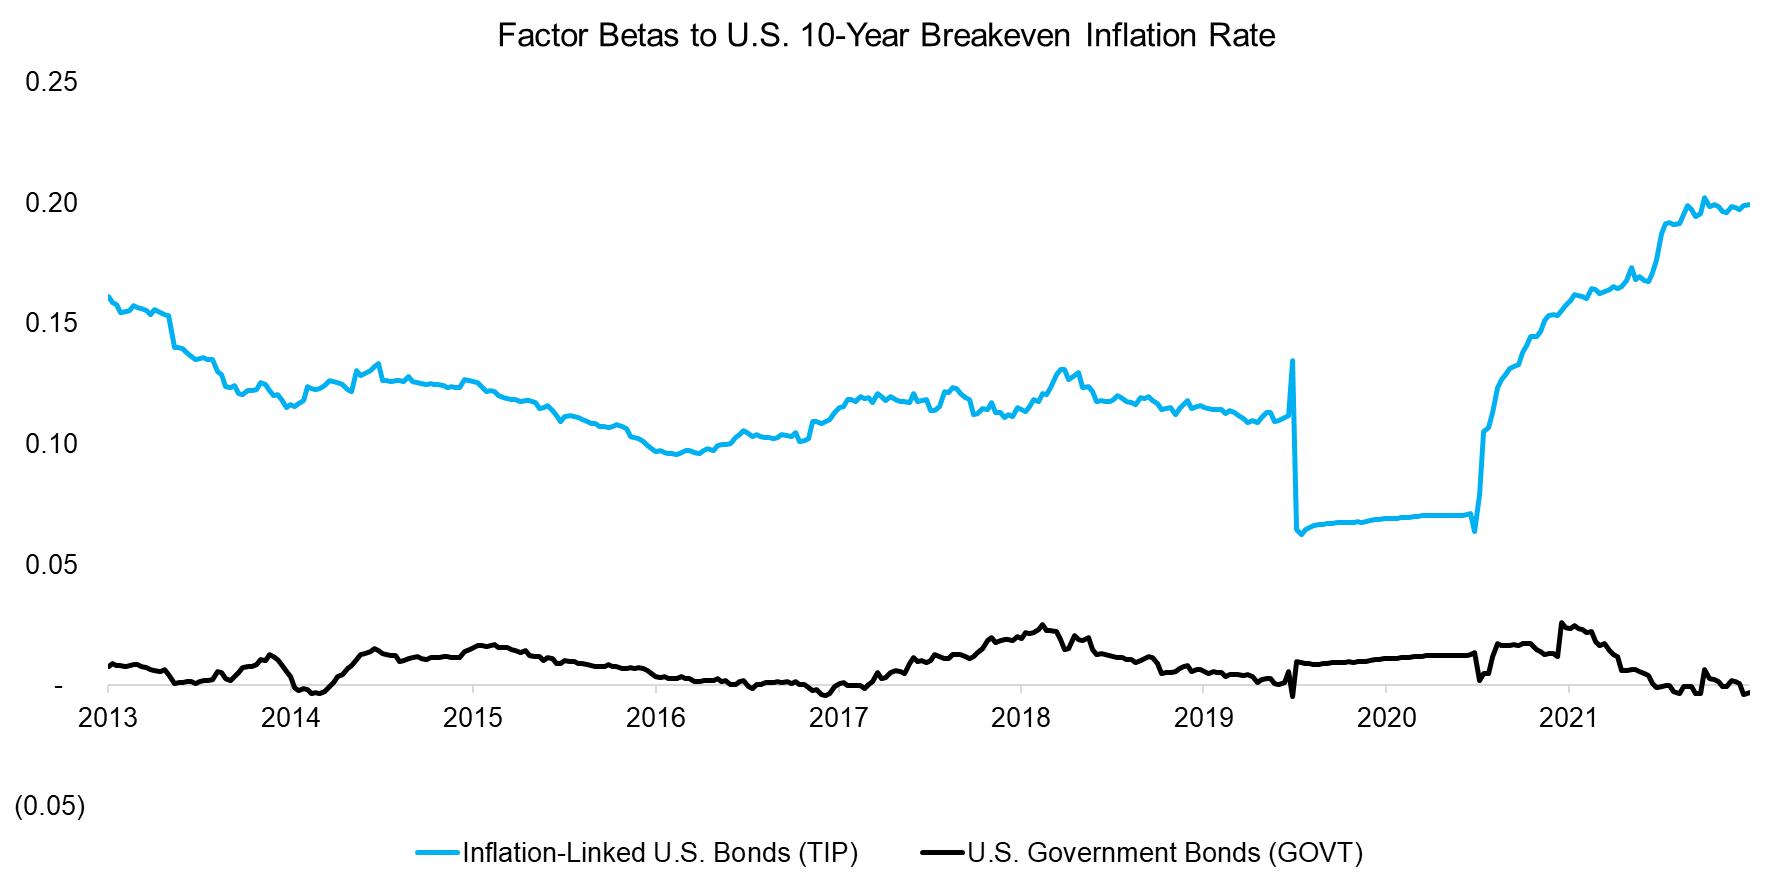 Factor Betas to U.S. 10-Year Breakeven Inflation Rate